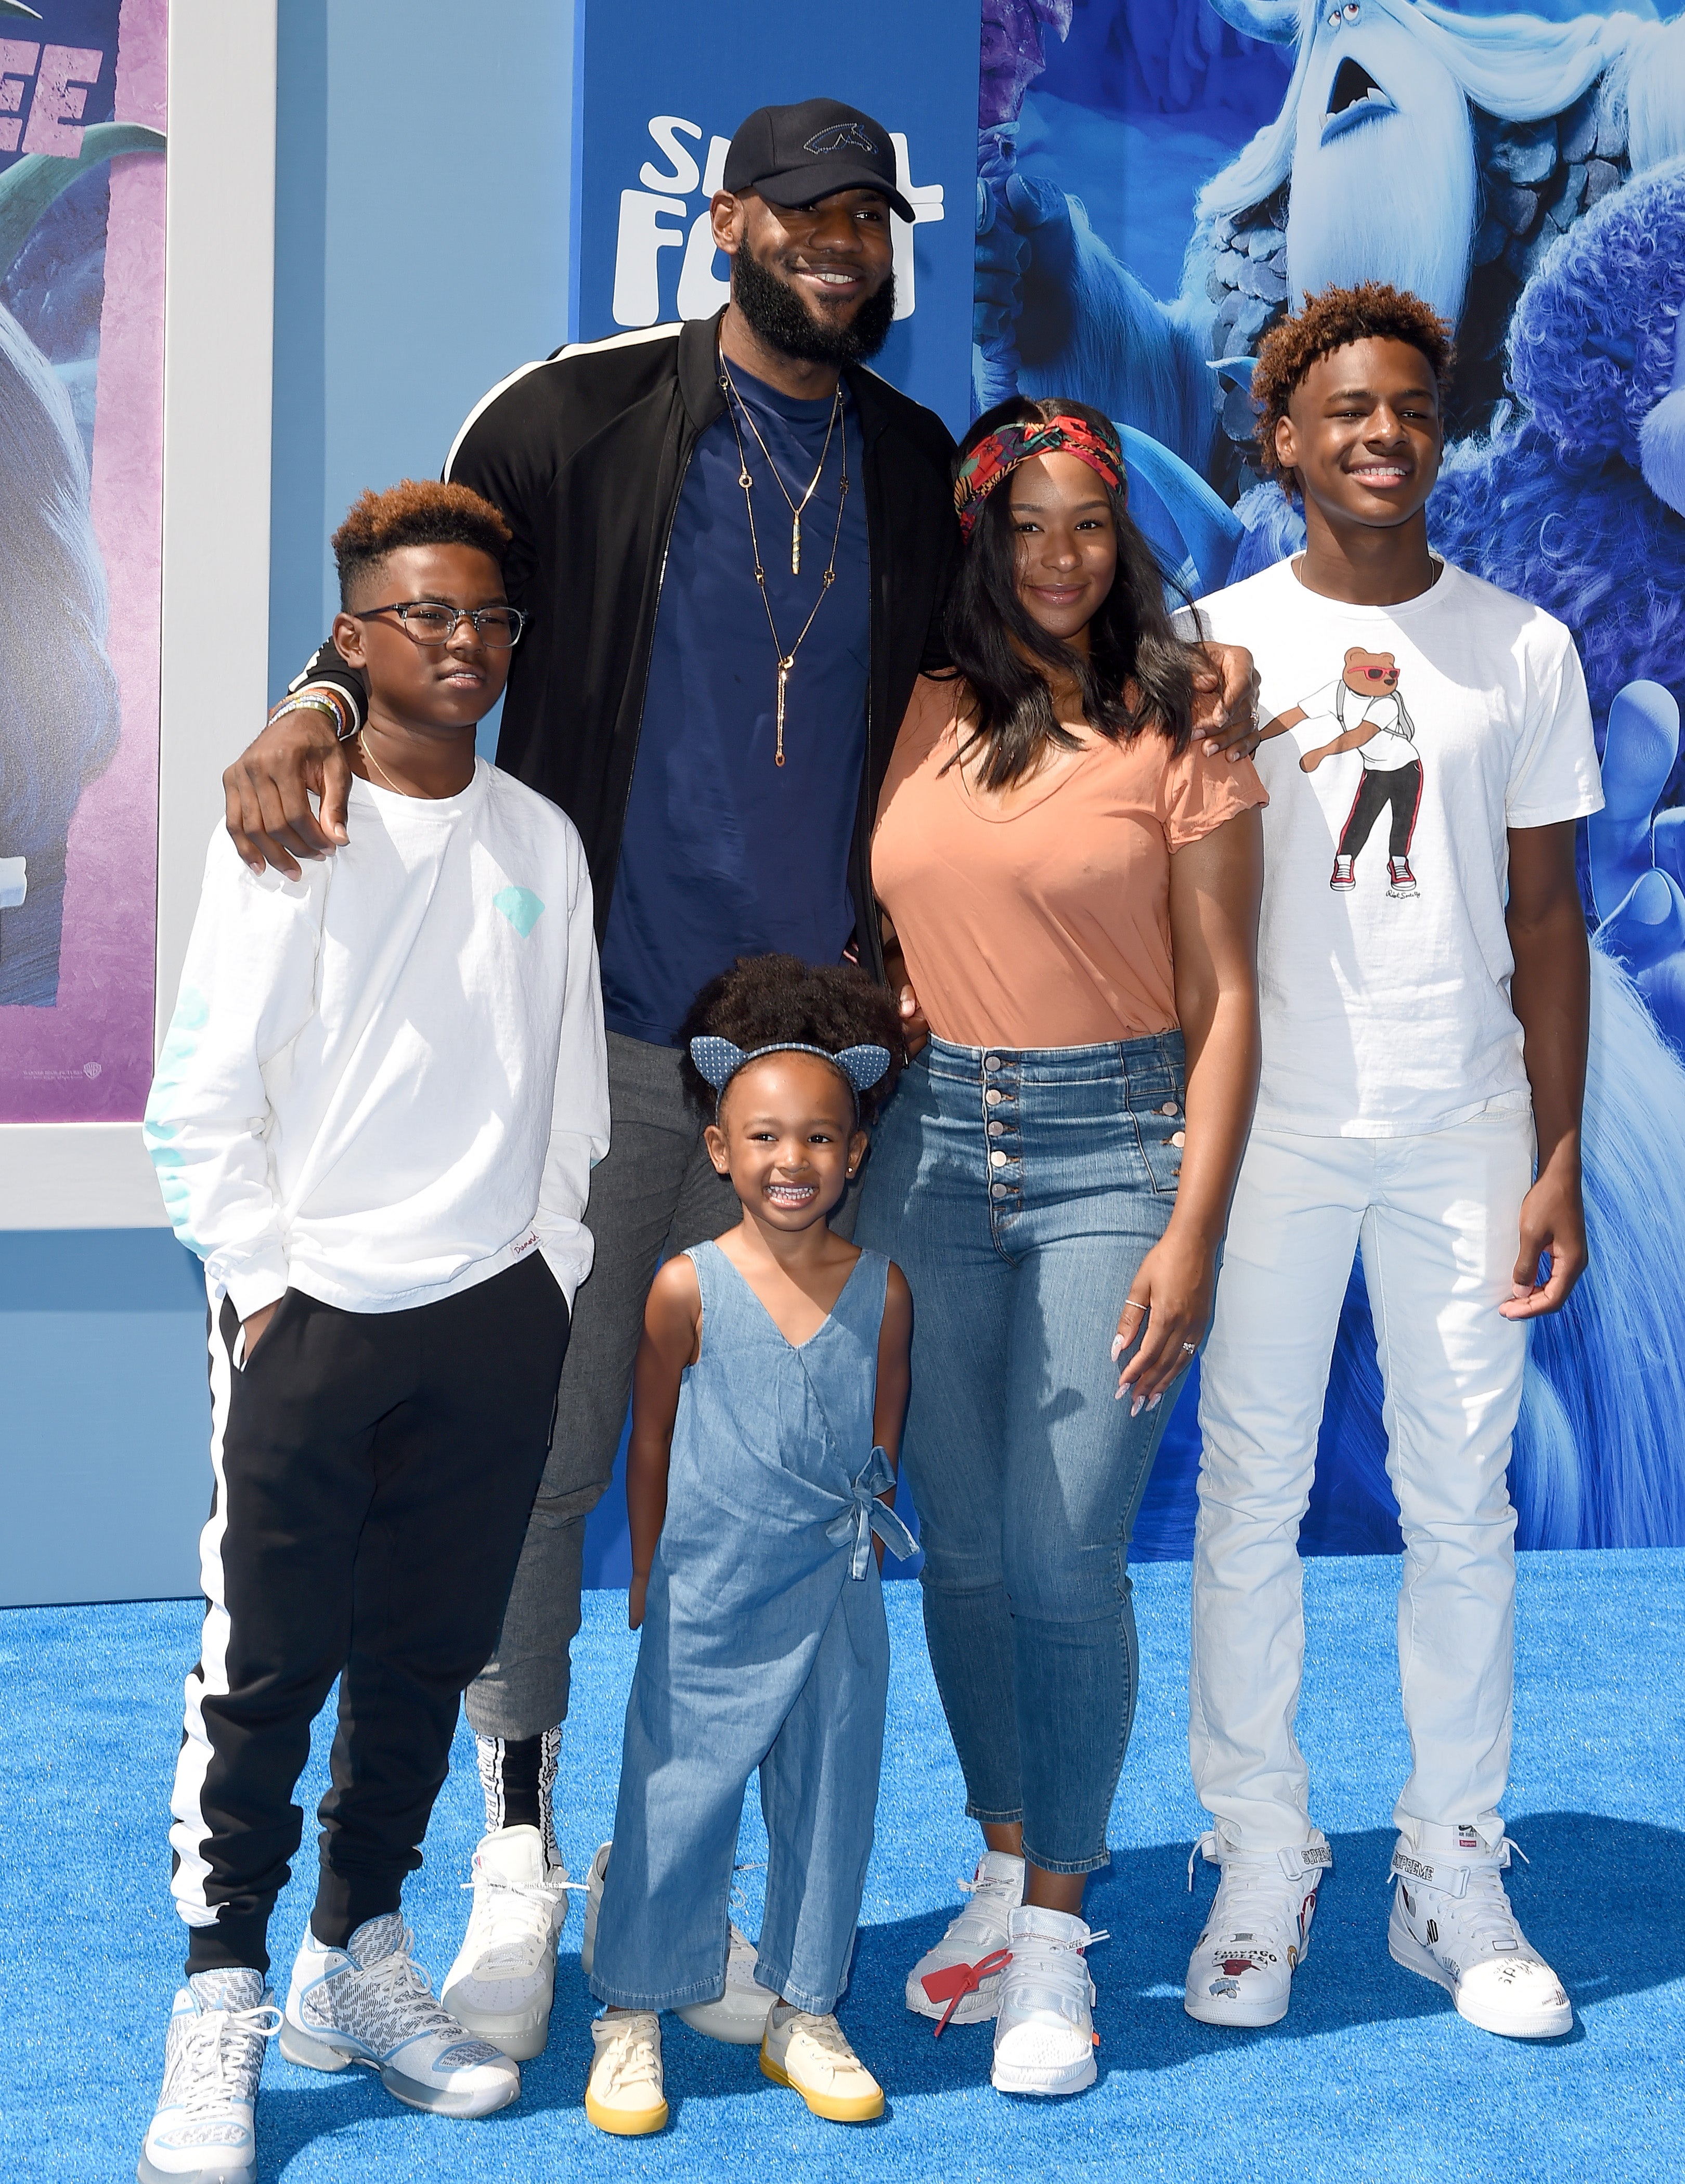 LeBron James' youngest son Bryce set to change high schools